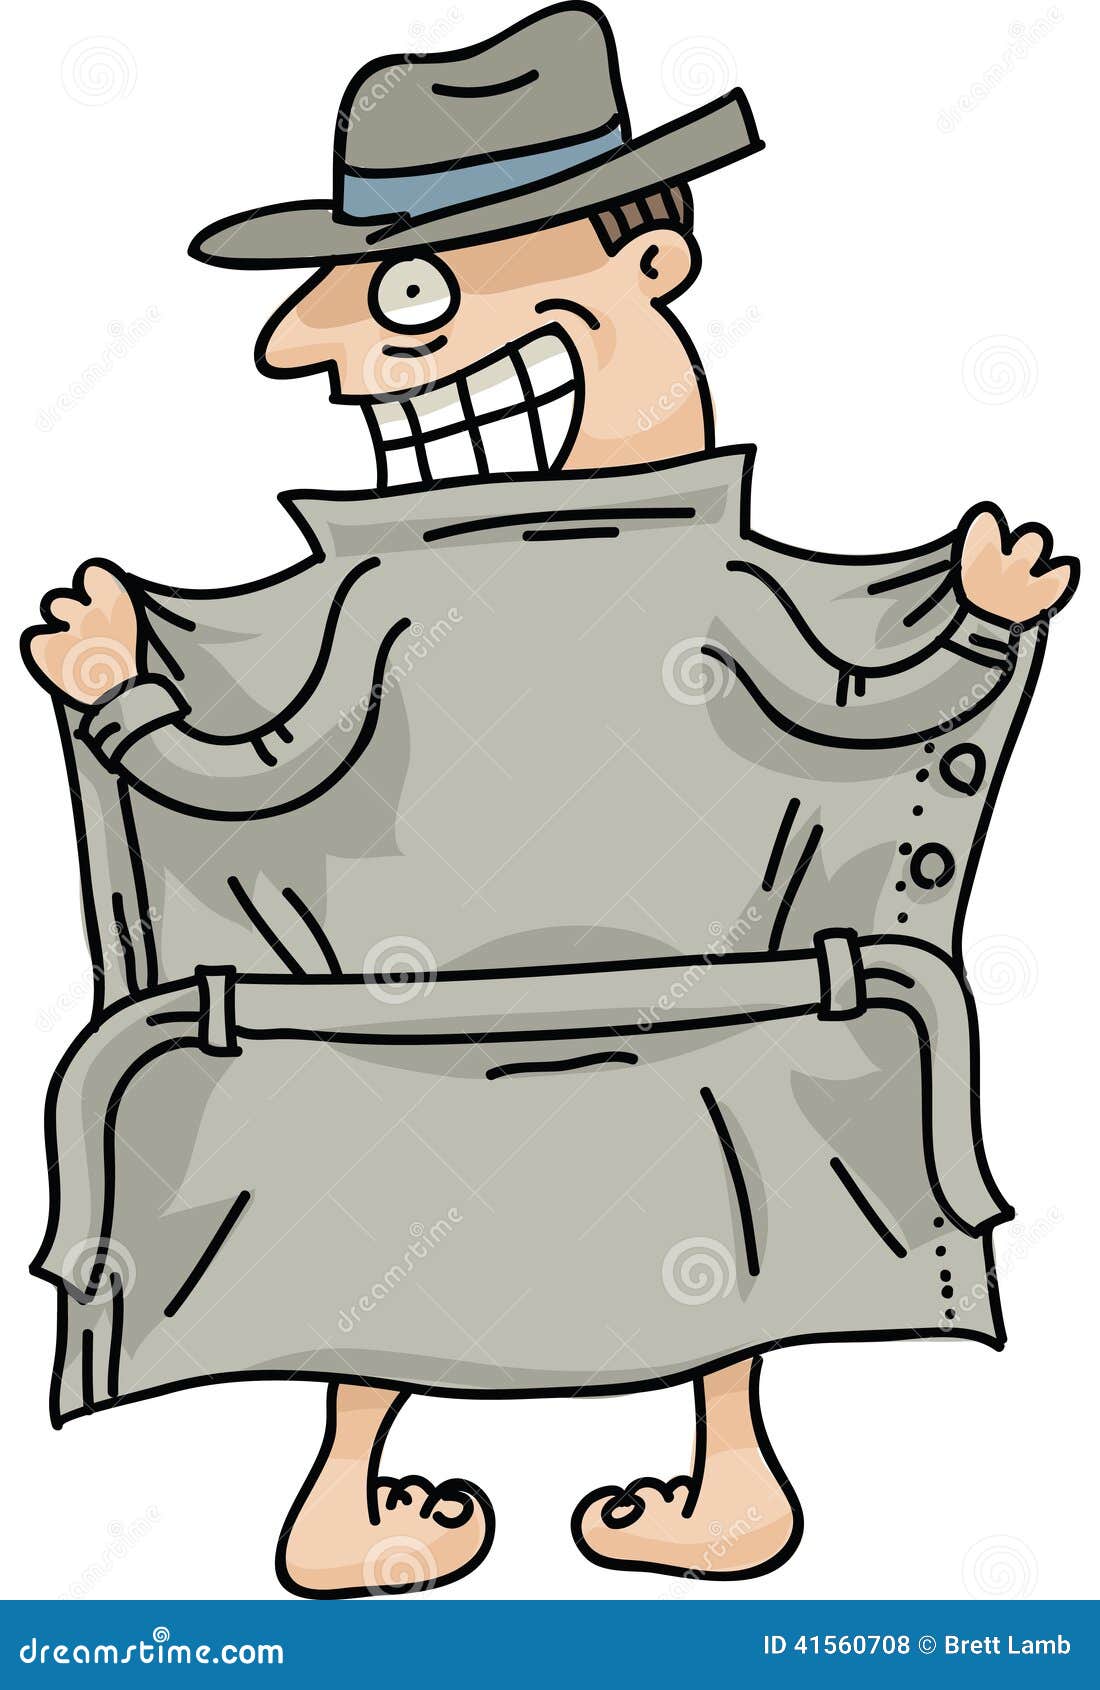 Clipart of show penis k18080893 - Search Clip Art 